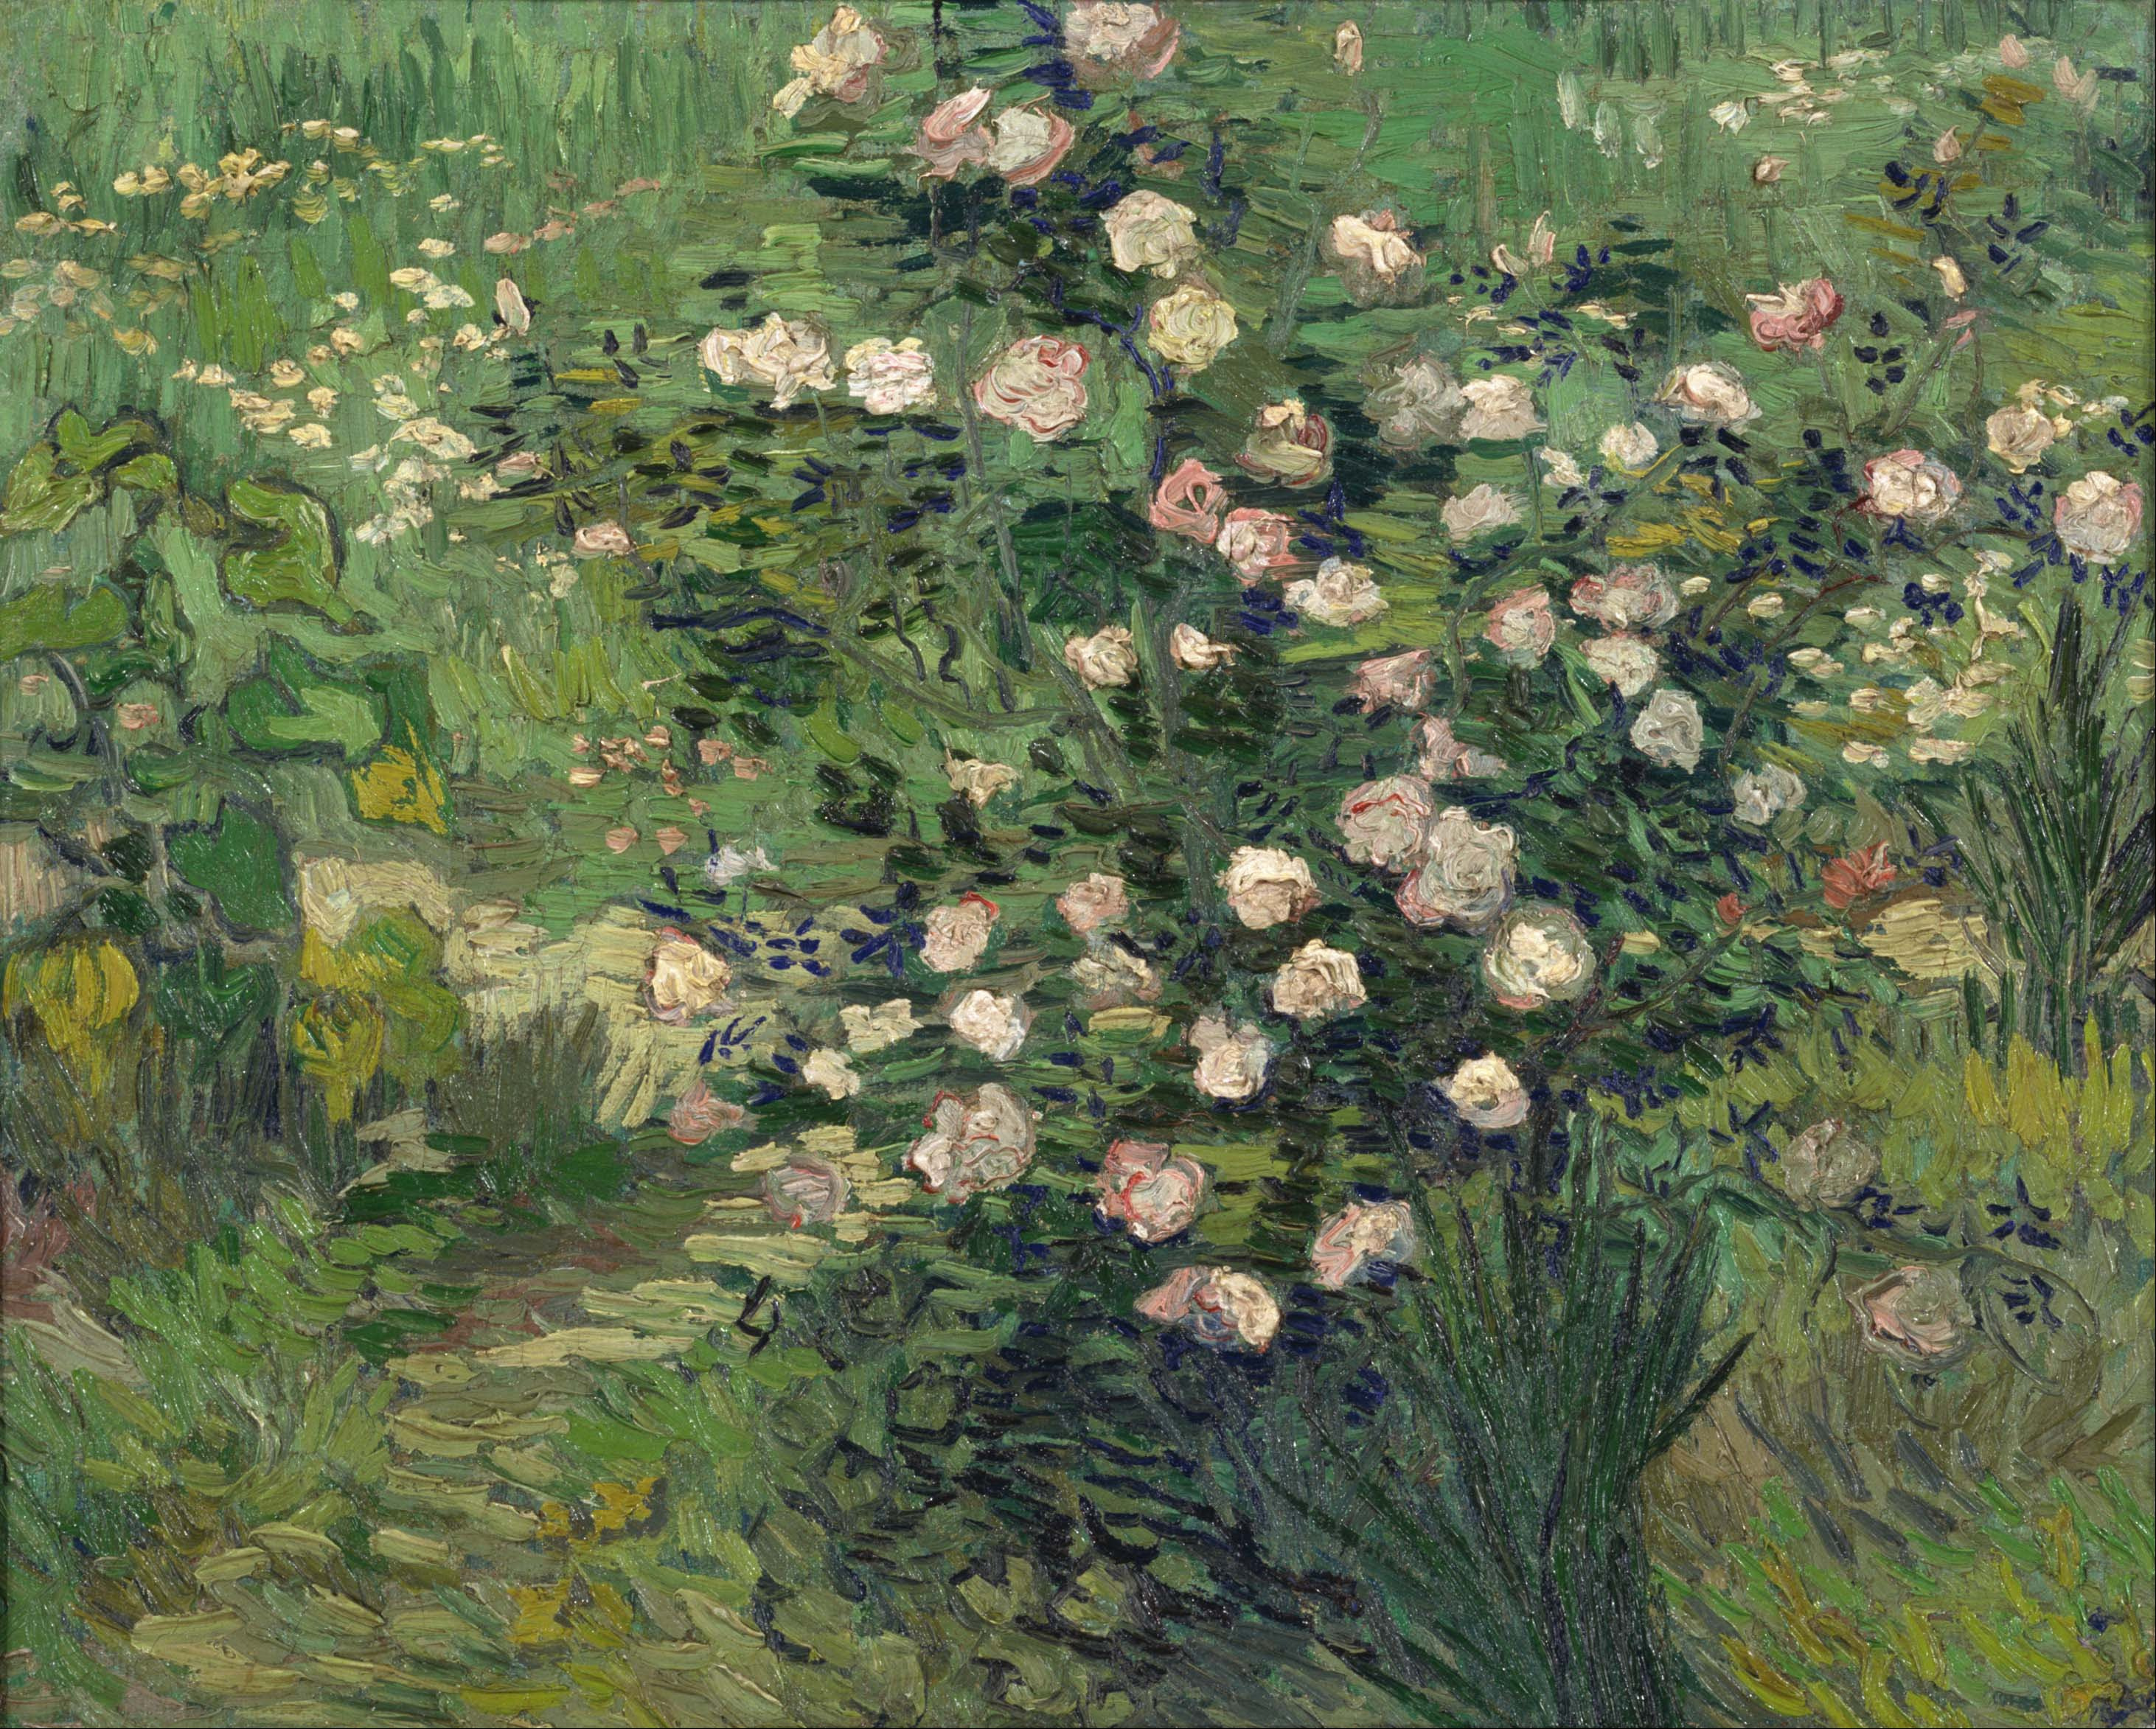 Roses by Vincent van Gogh - 1889 - 41.3 x 33.0 cm The National Museum of Western Art, Tokyo